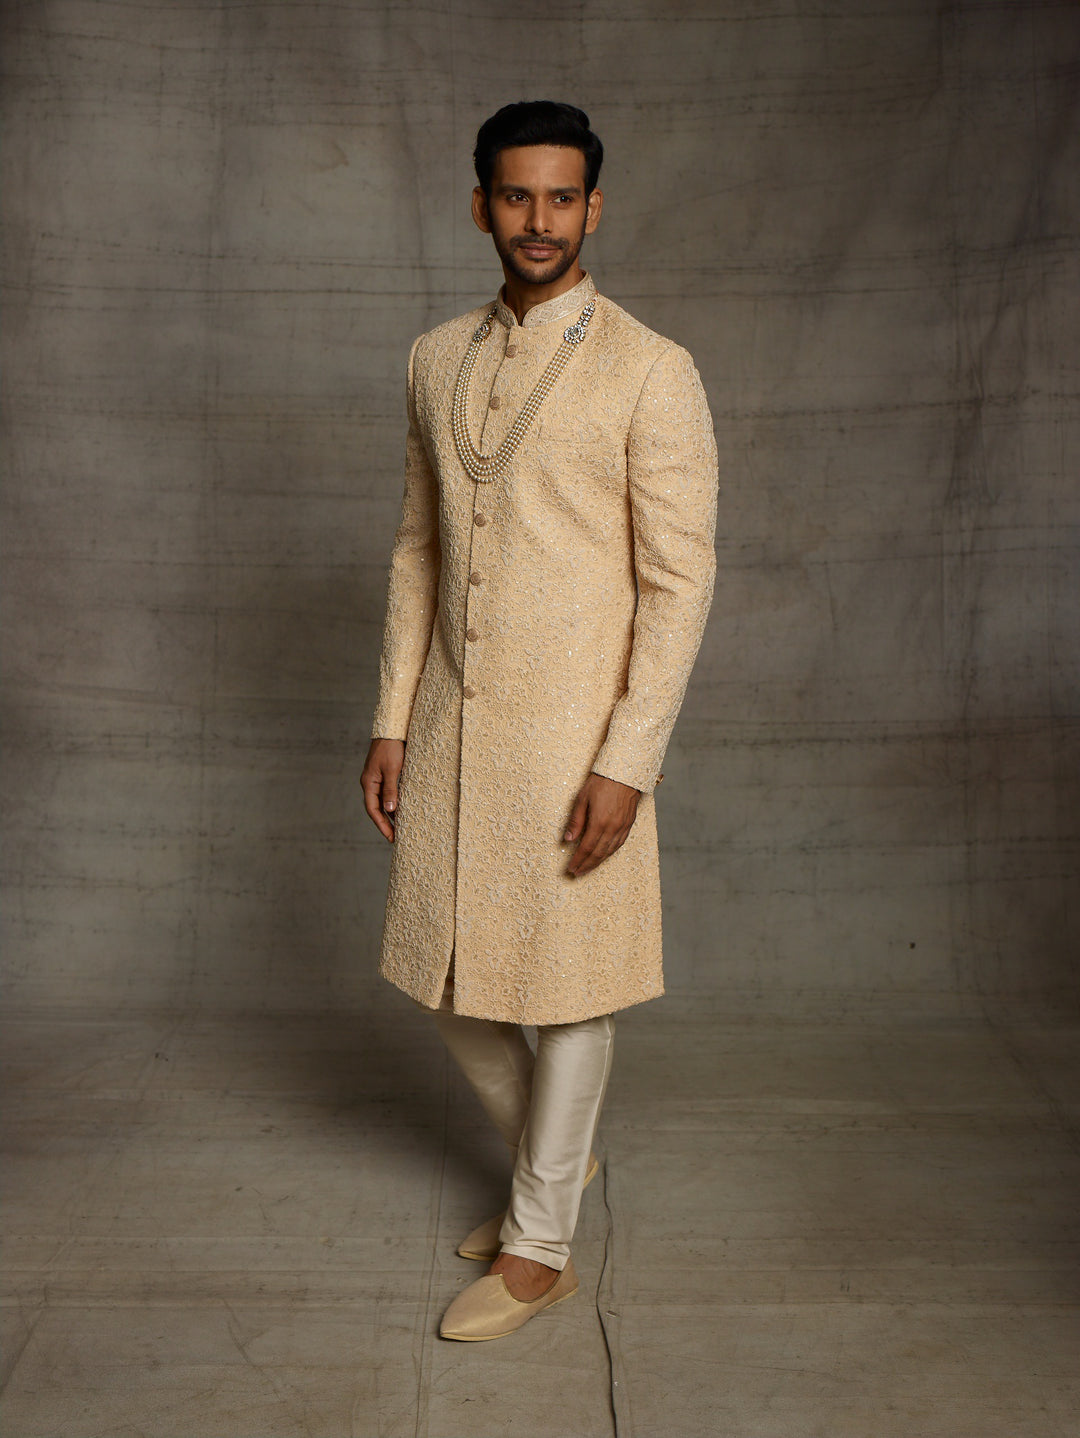 Simple sherwani in gold color